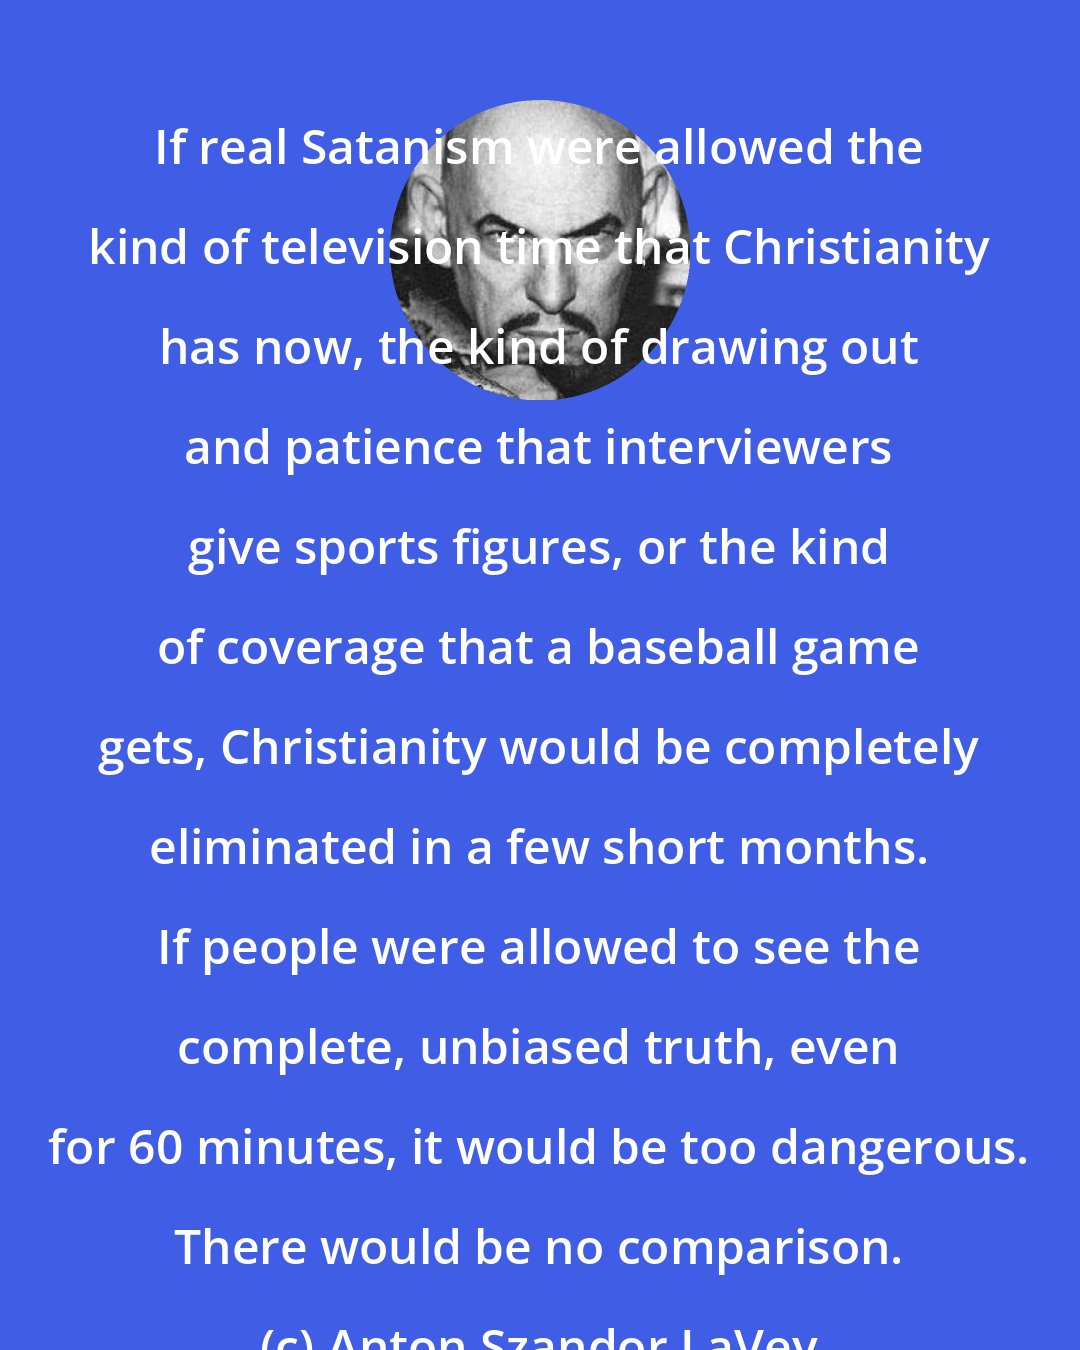 Anton Szandor LaVey: If real Satanism were allowed the kind of television time that Christianity has now, the kind of drawing out and patience that interviewers give sports figures, or the kind of coverage that a baseball game gets, Christianity would be completely eliminated in a few short months. If people were allowed to see the complete, unbiased truth, even for 60 minutes, it would be too dangerous. There would be no comparison.